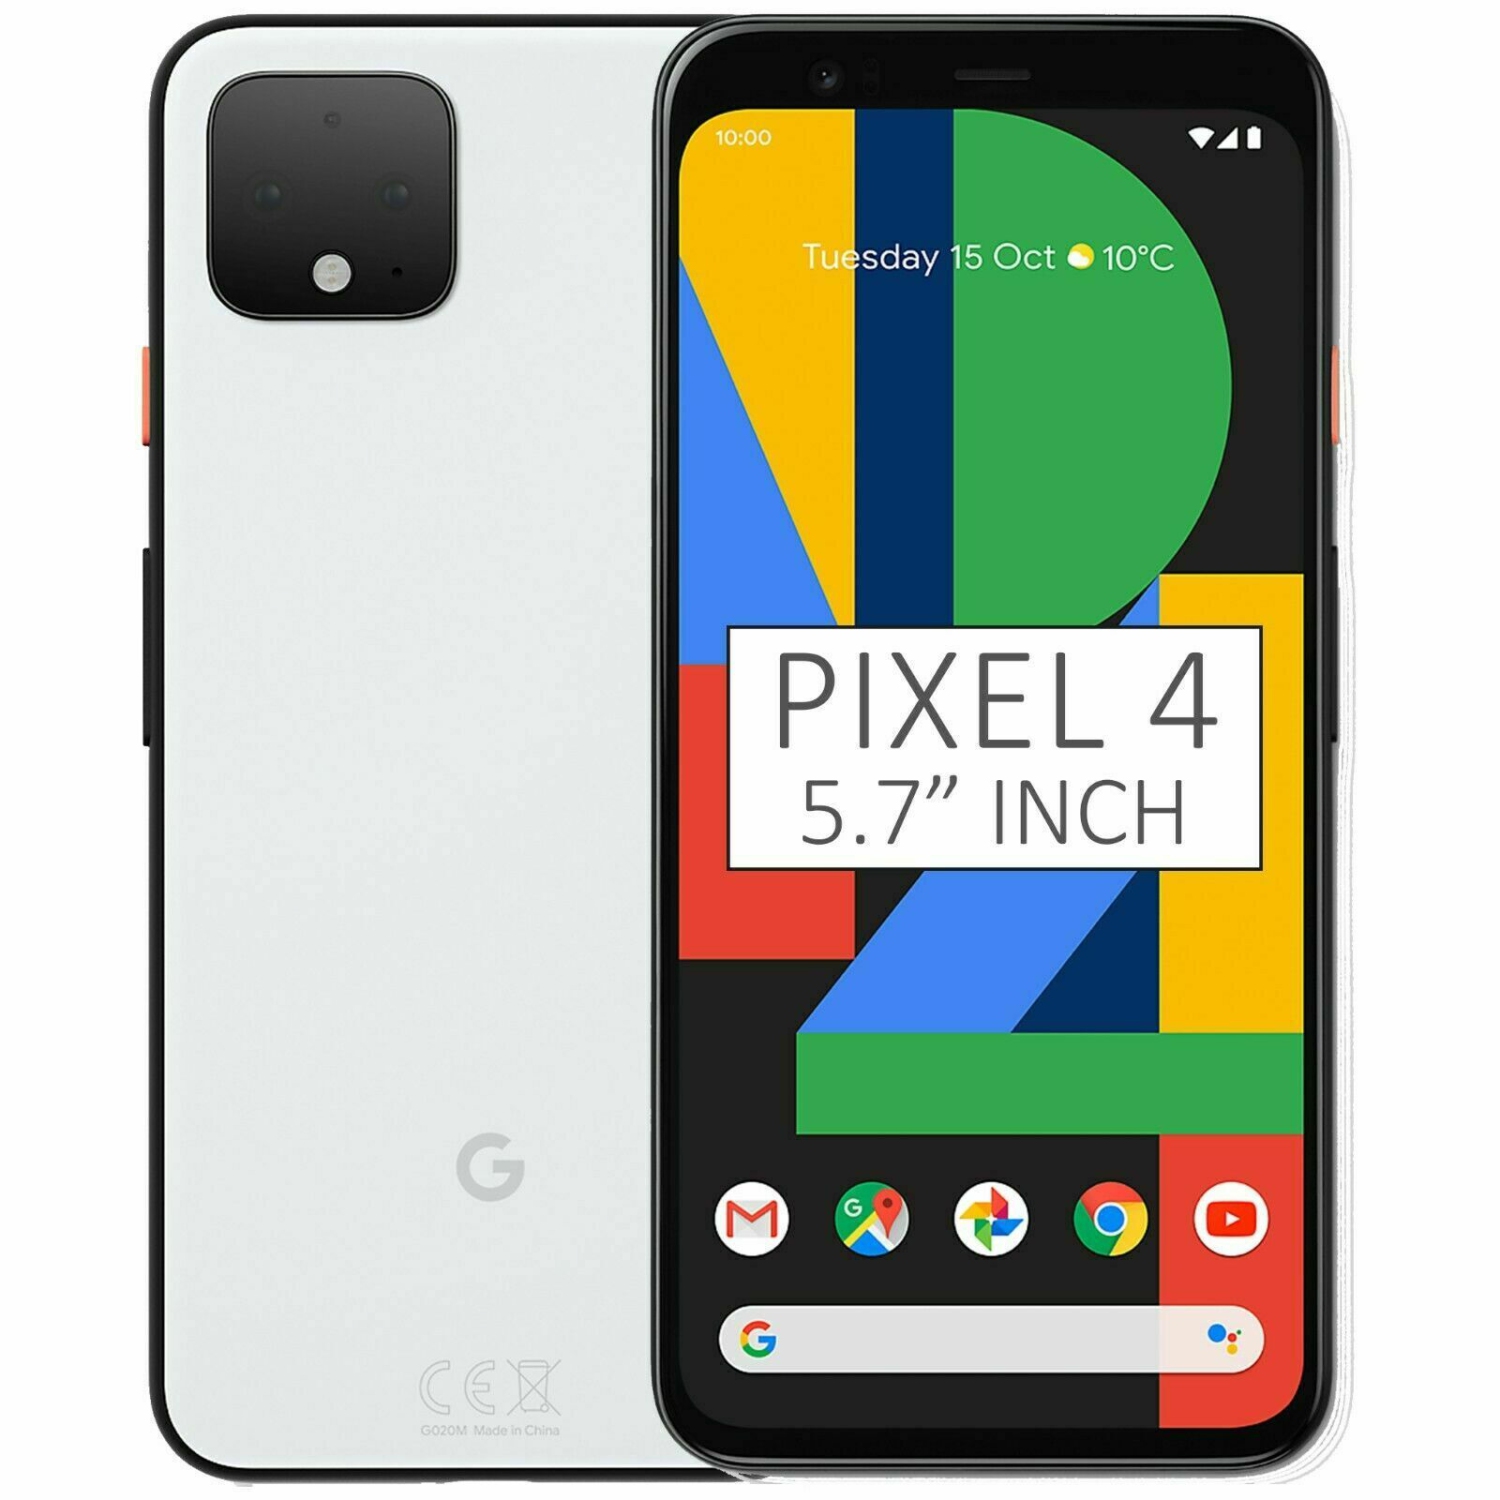 Google Pixel 4 128GB Smartphone - Clearly White - Unlocked - Open Box